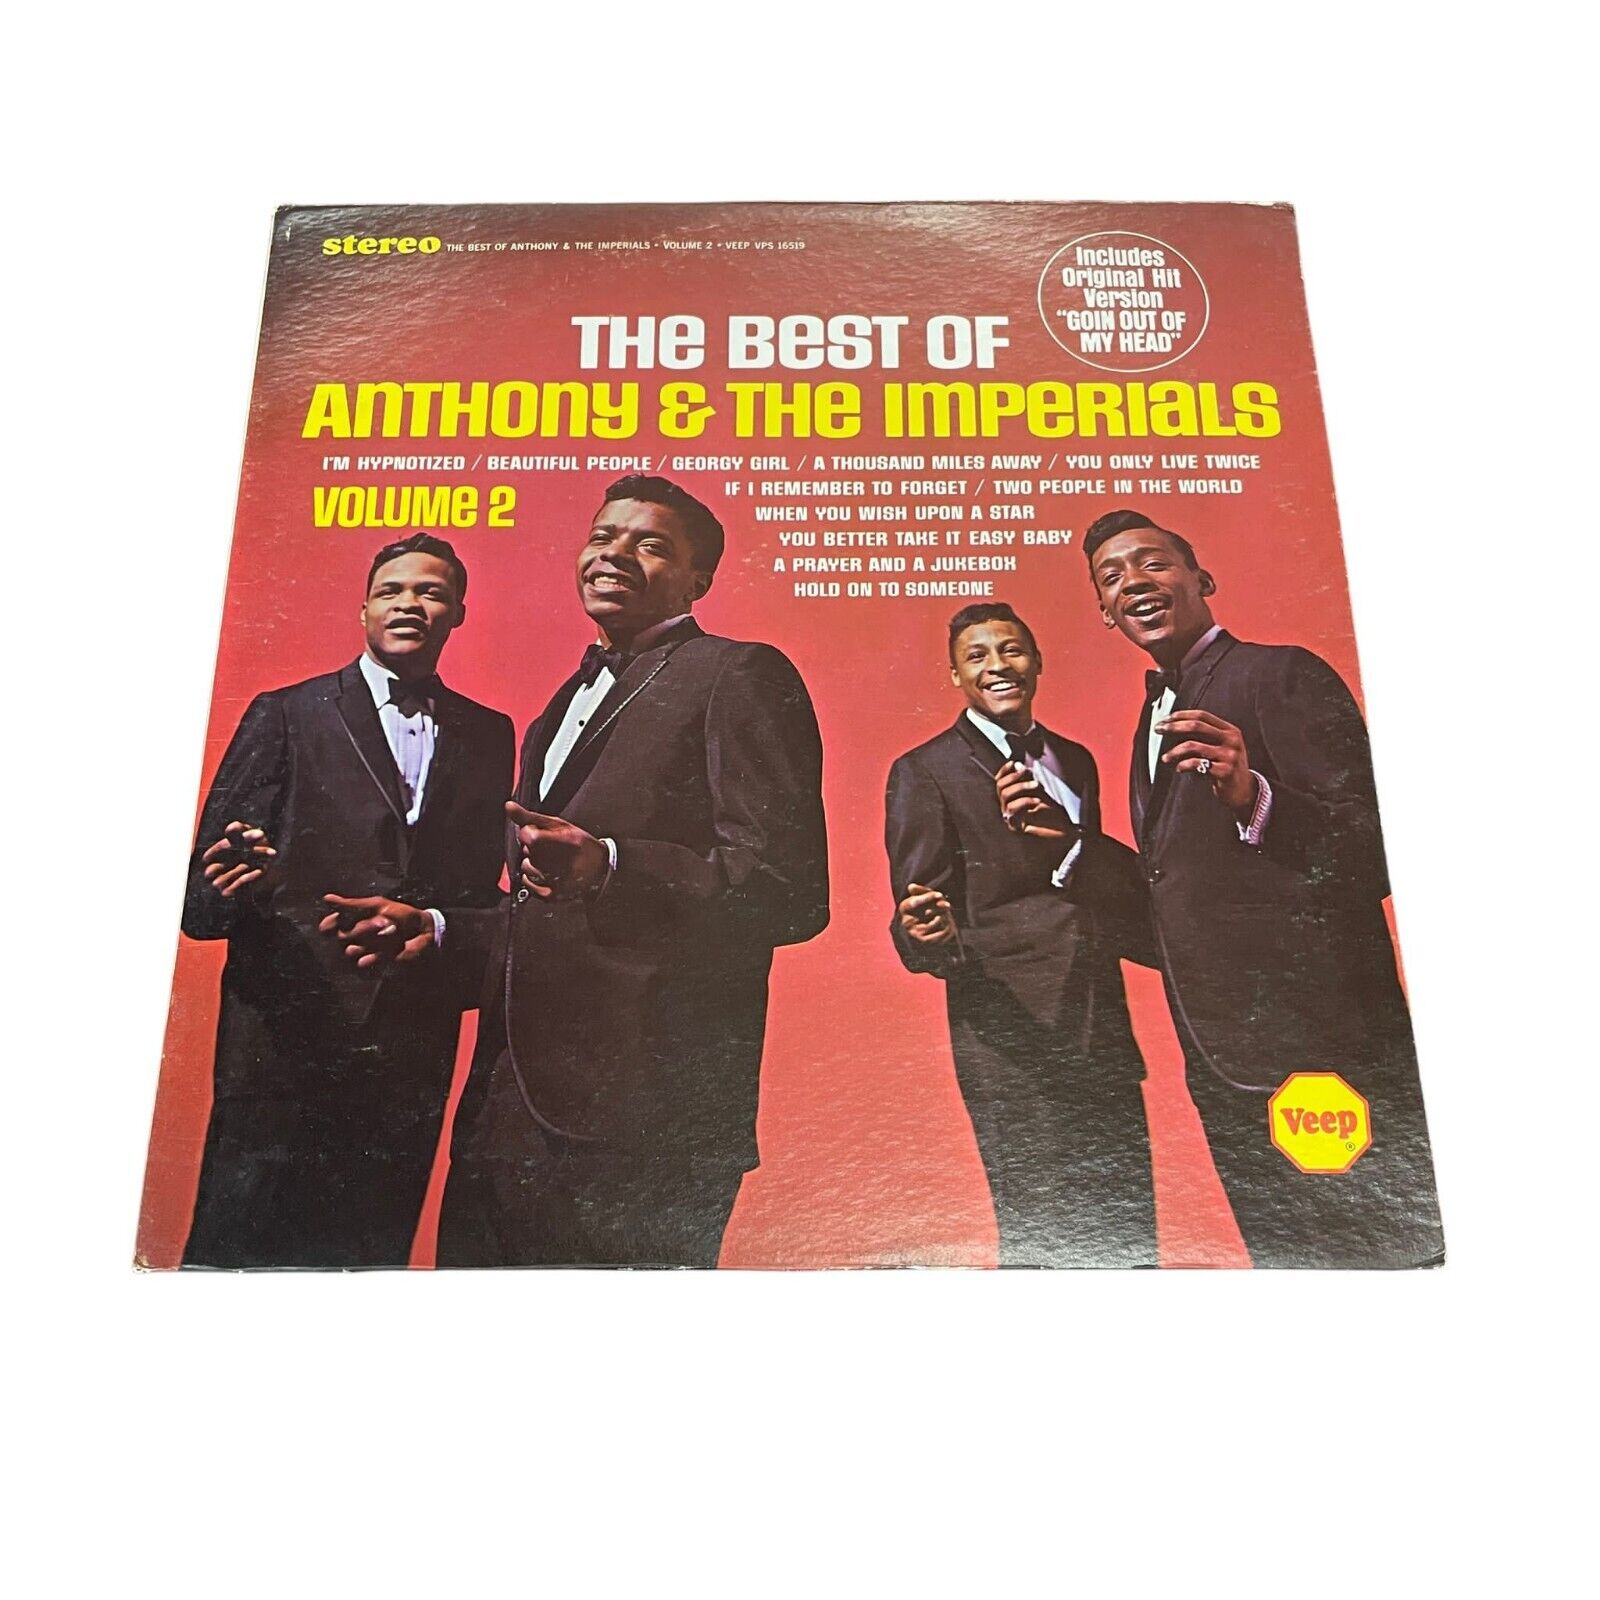 ANTHONY & THE IMPERIALS Best Vol.2 VEEP 16519 '68 